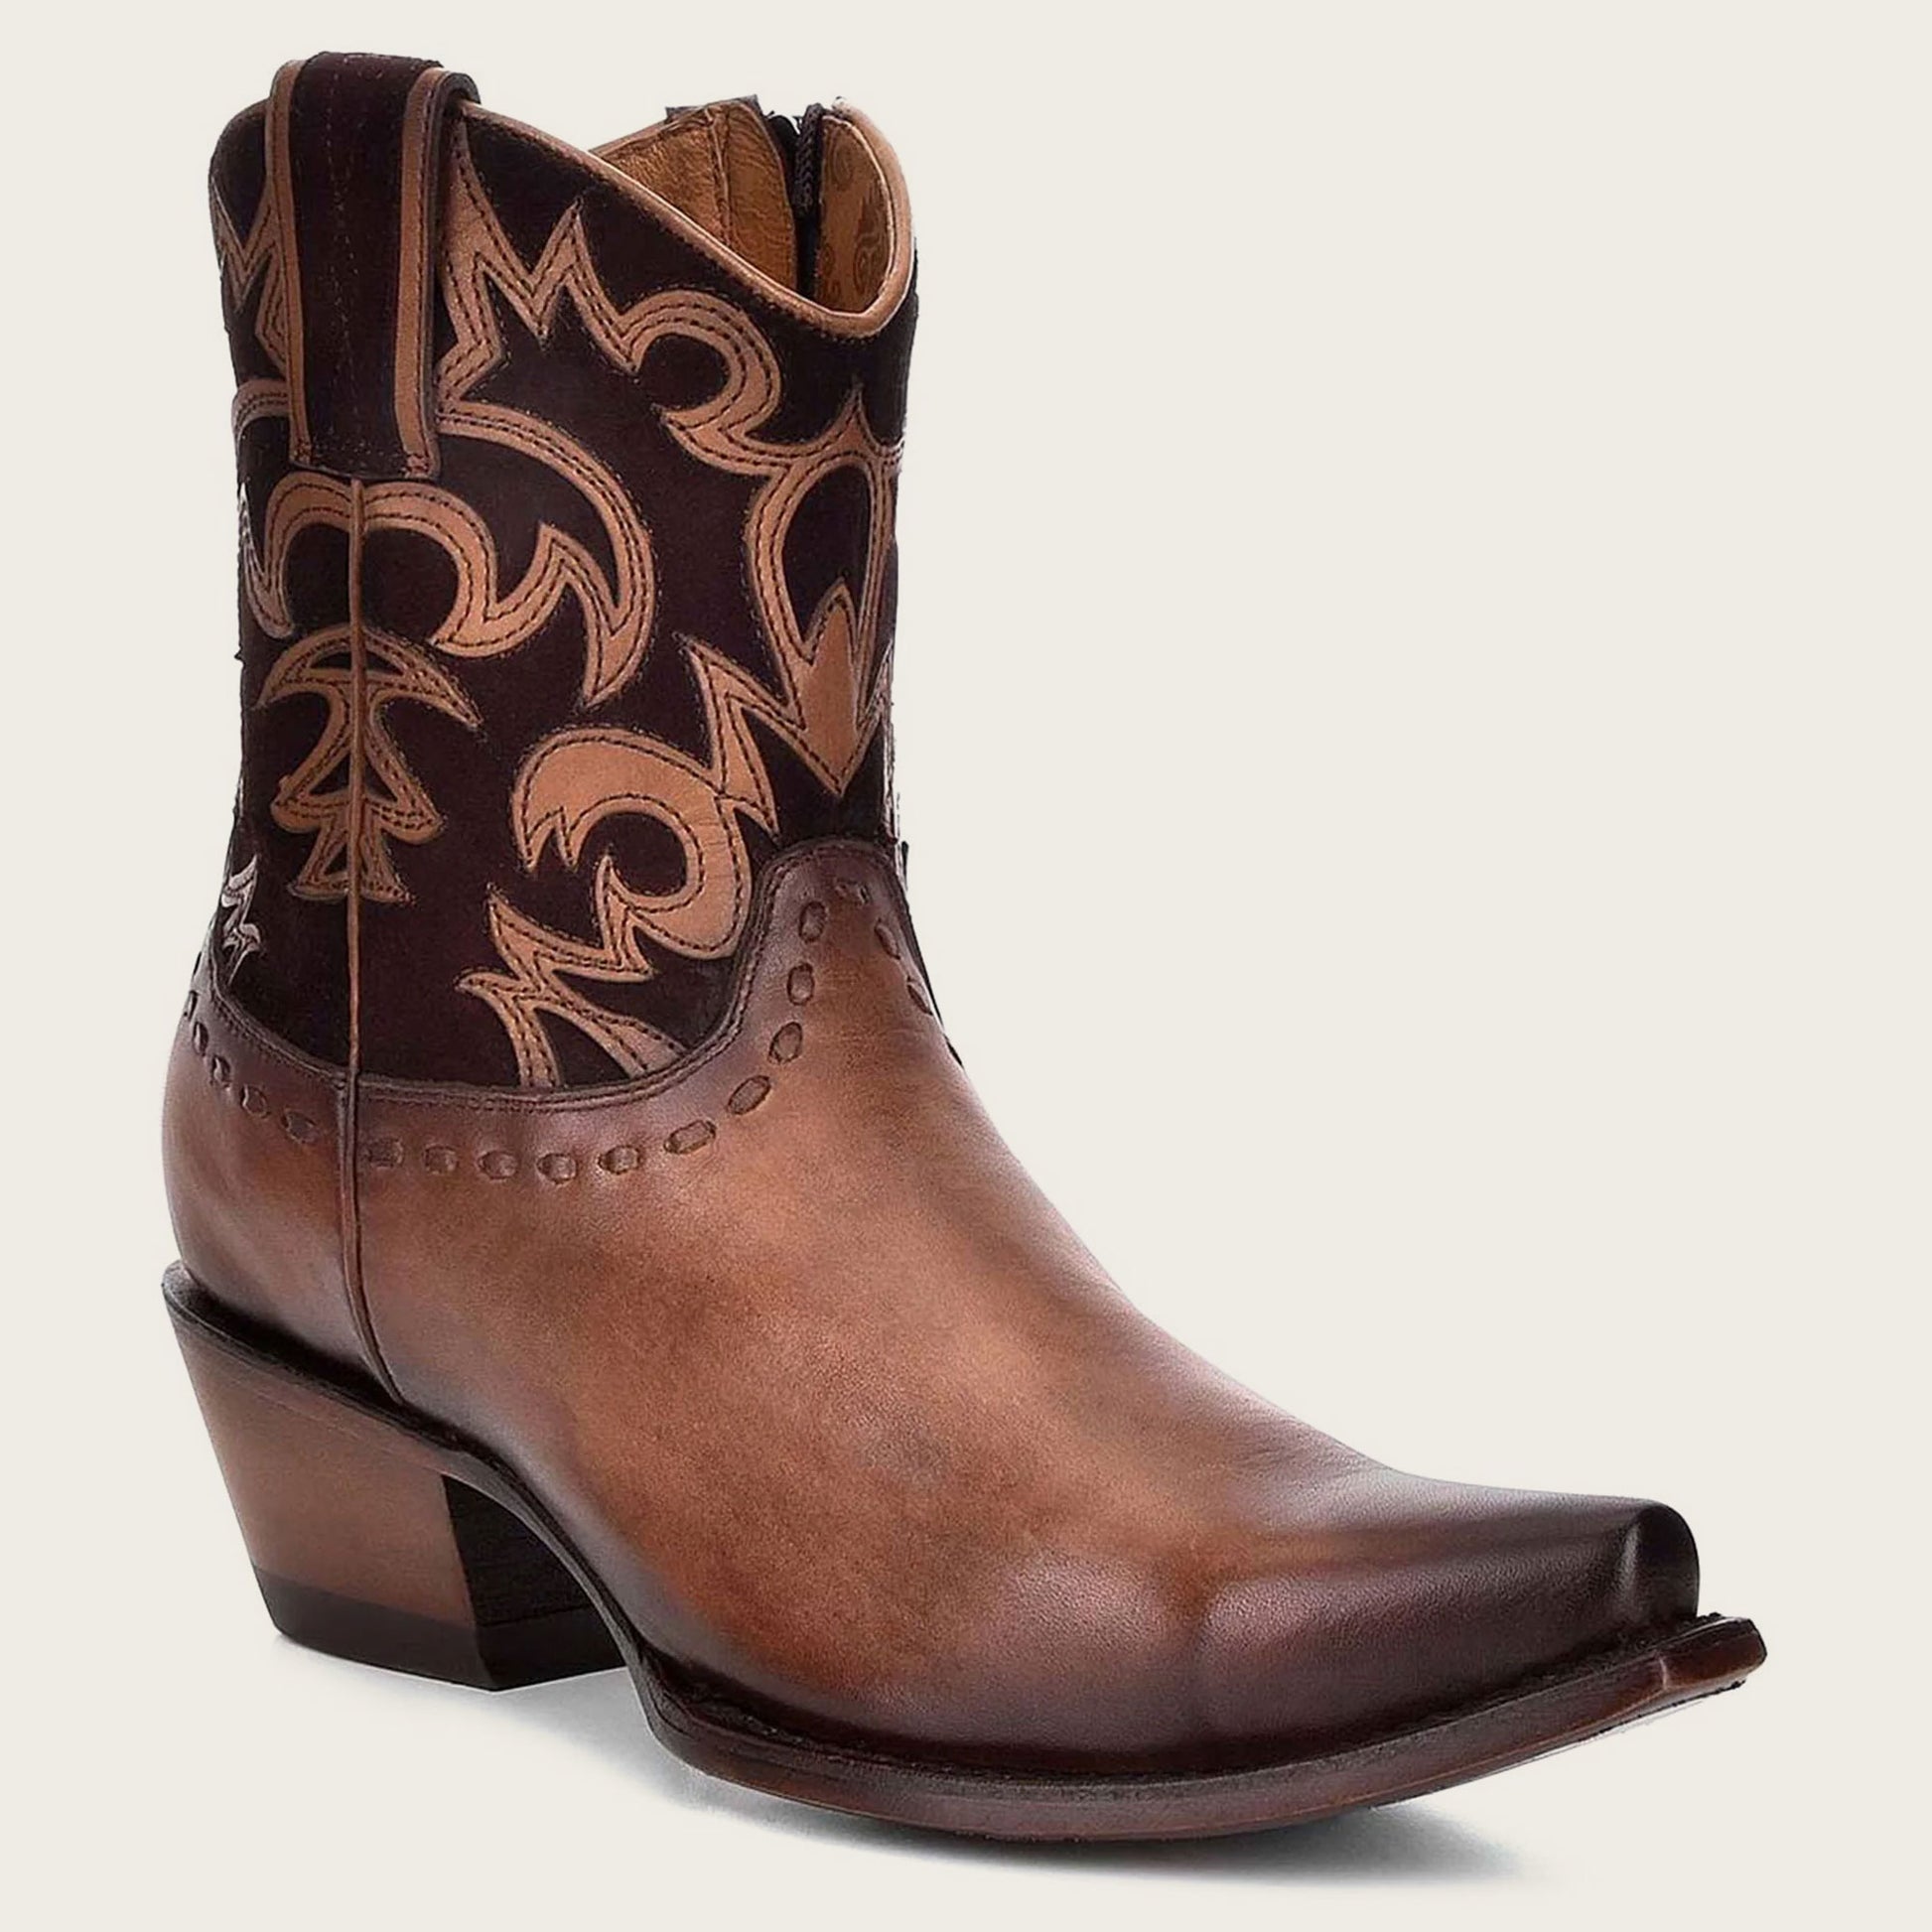 Elevate your fashion game with our Western Chic collection of bovine leather booties for women